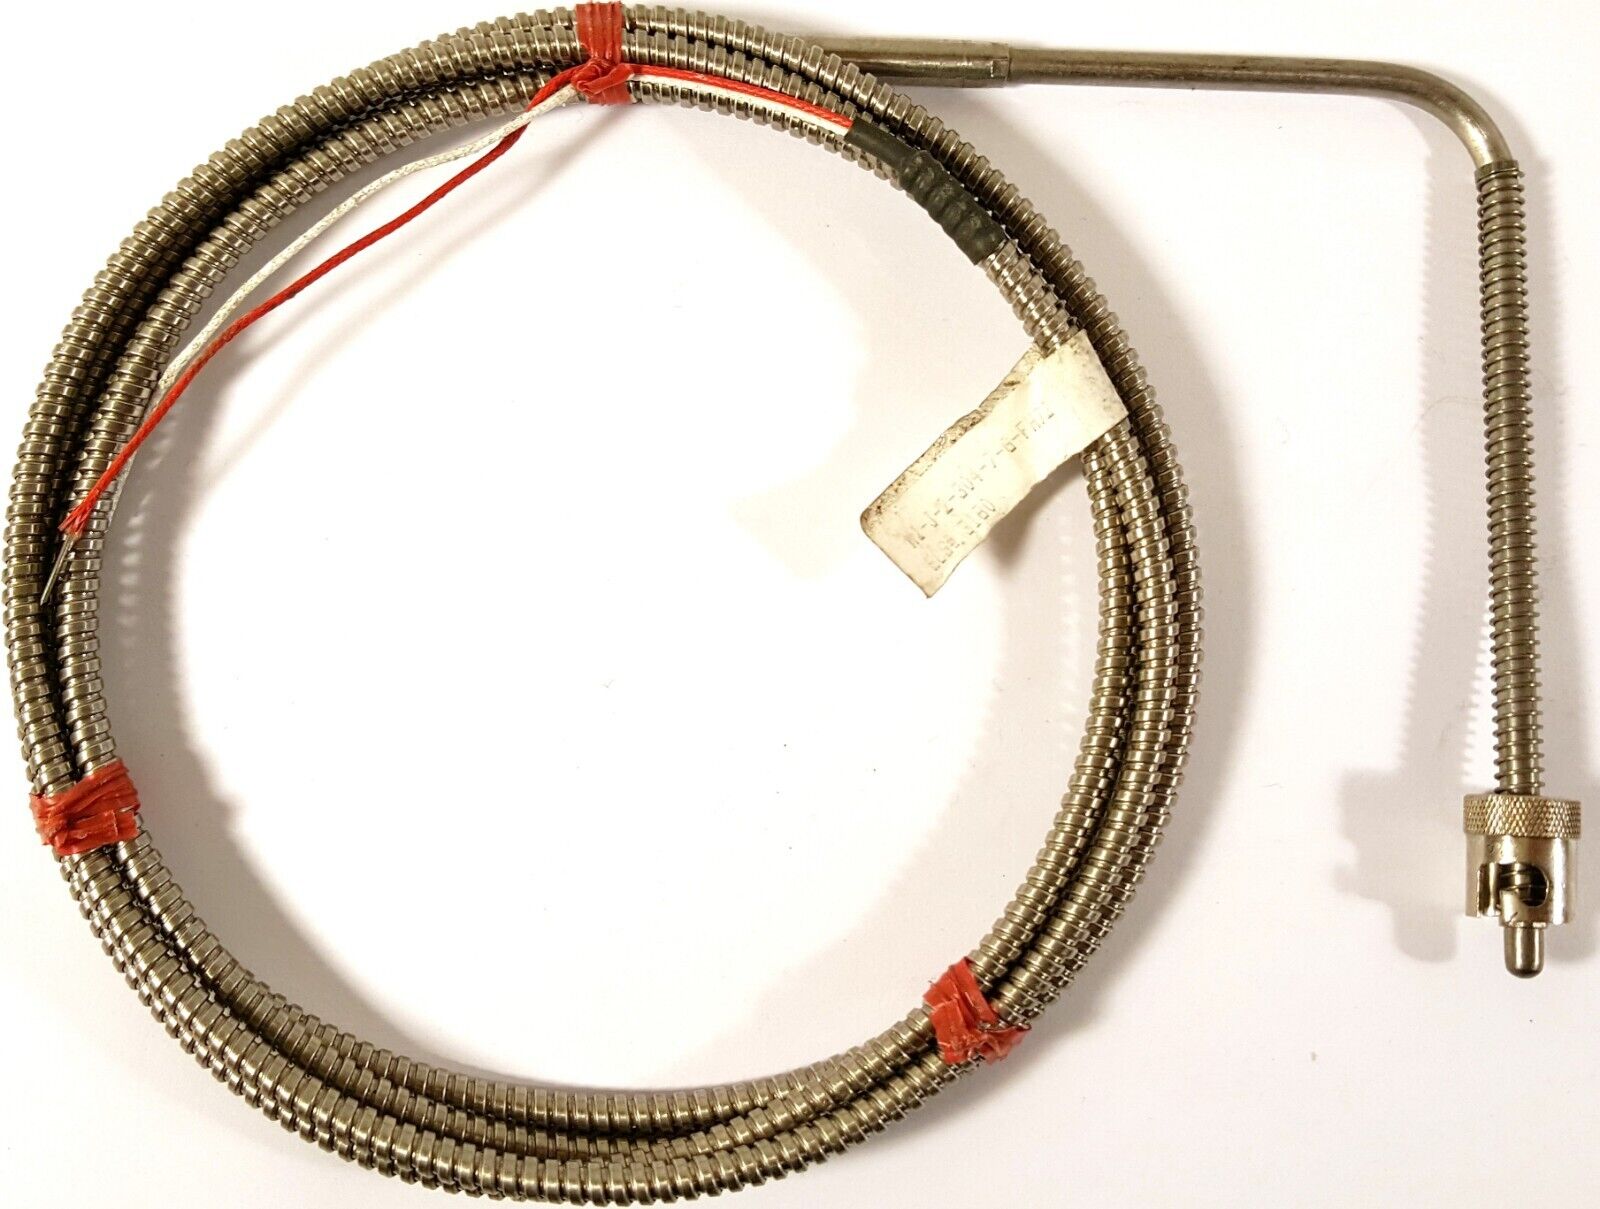 Air-Vac PCBRM System 5.2 SS Preheater Thermocouple replacement